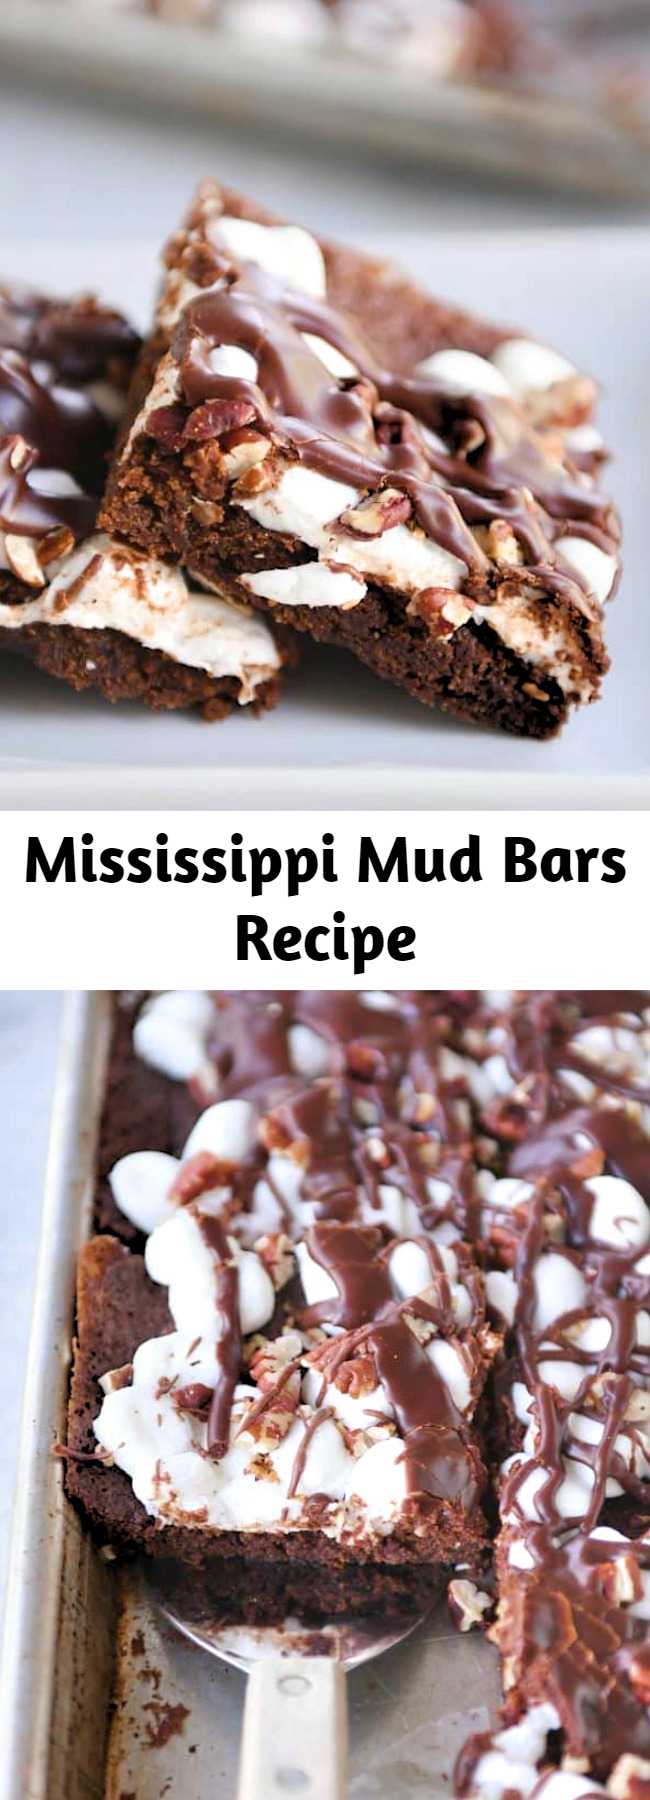 Mississippi Mud Bars Recipe - The brownie + marshmallows + toasted pecans + fudge sauce combo has never been tastier (or easier!). These Mississippi Mud Bars are insanely delicious and so simple to make!